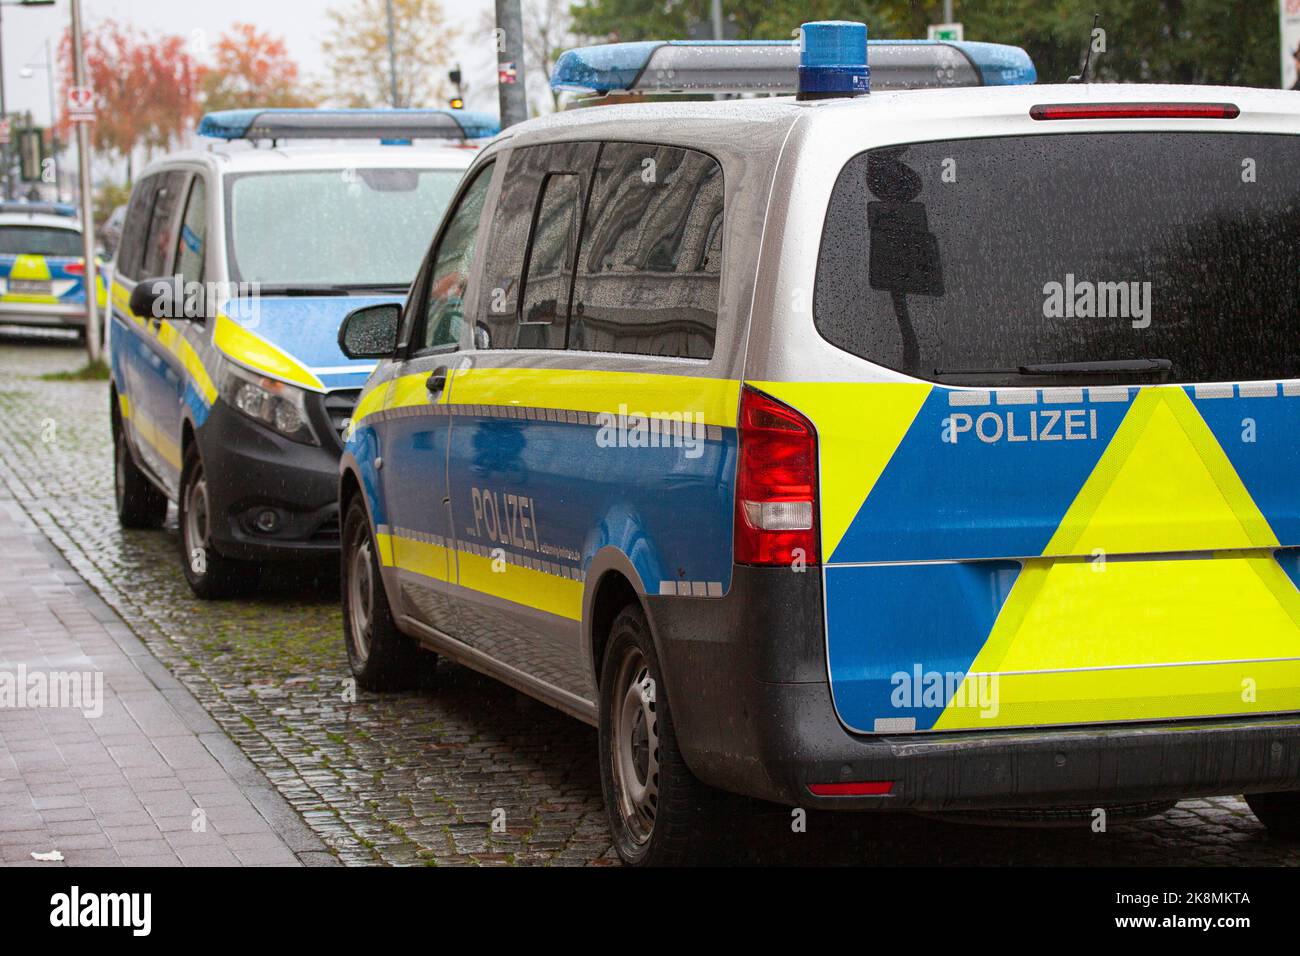 German police cars parked on street. Flensburg, Germany Stock Photo